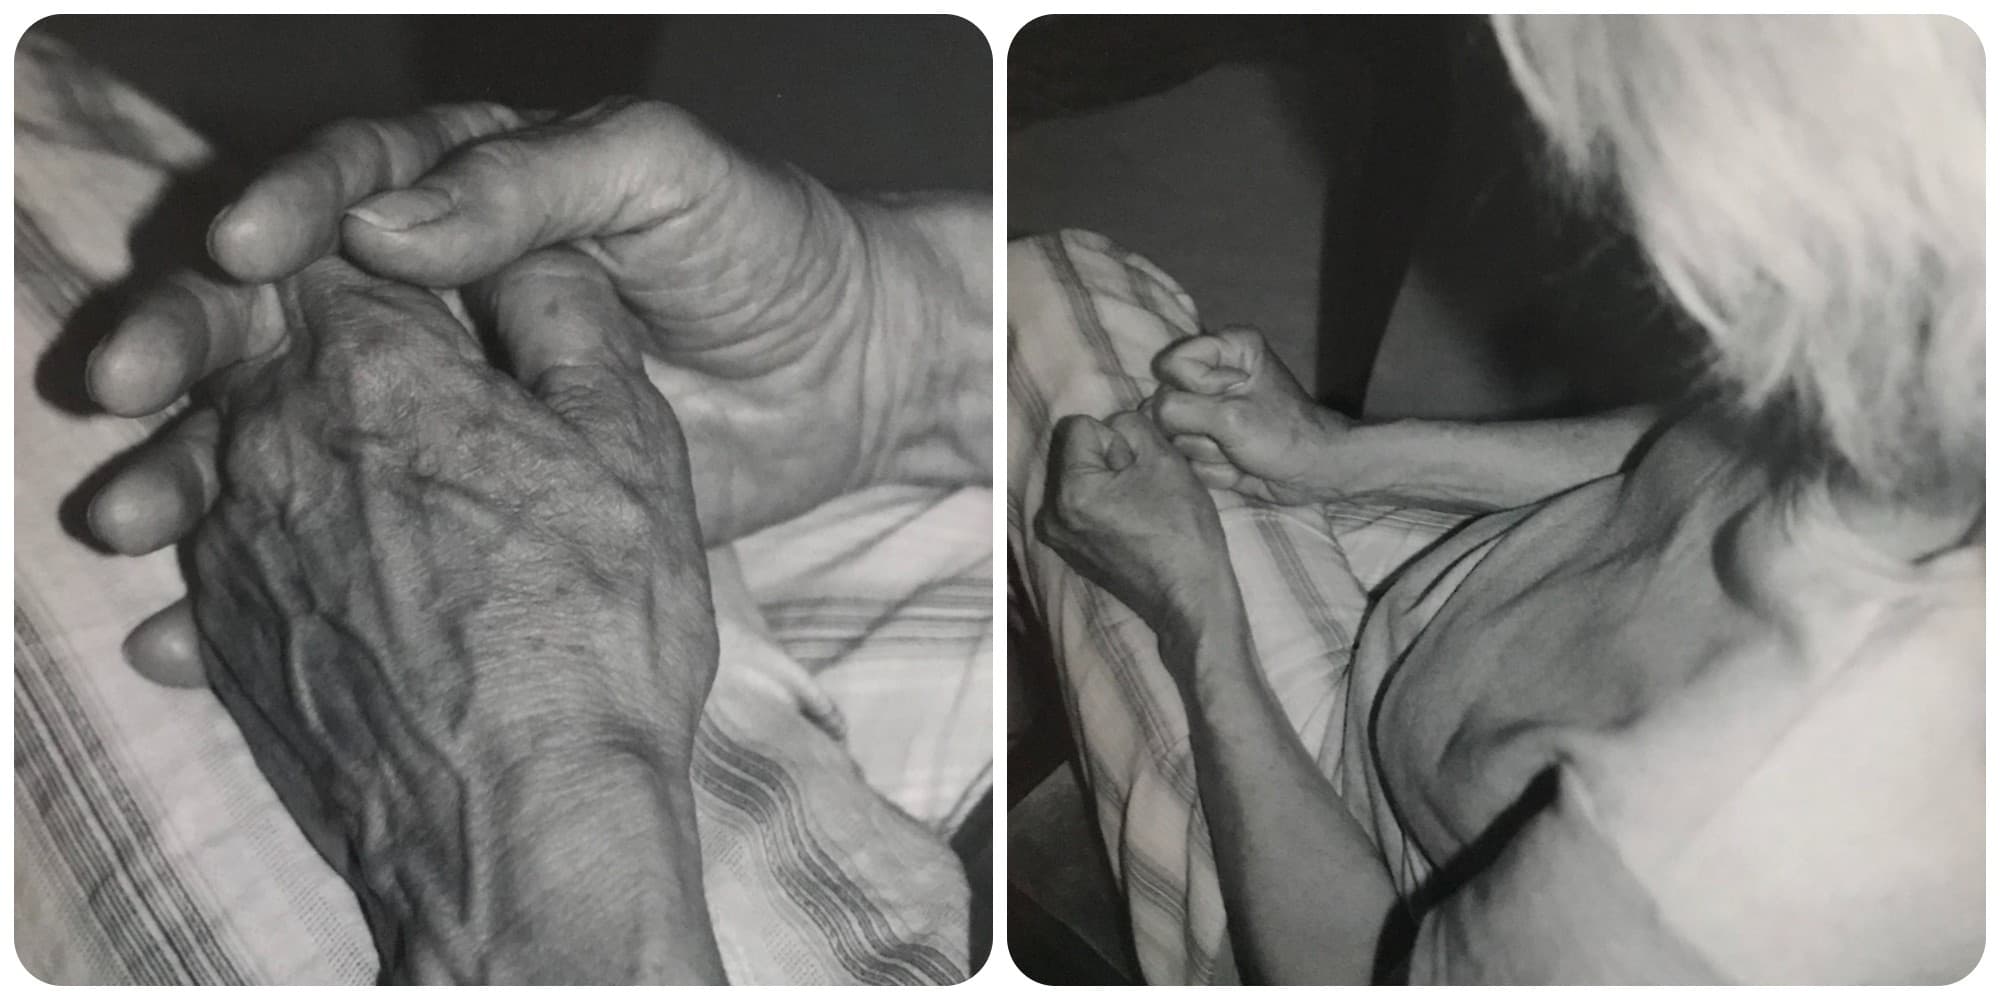 Olympia Dukakis's hands, as photographed by the author. (Courtesy Anne Gardner)